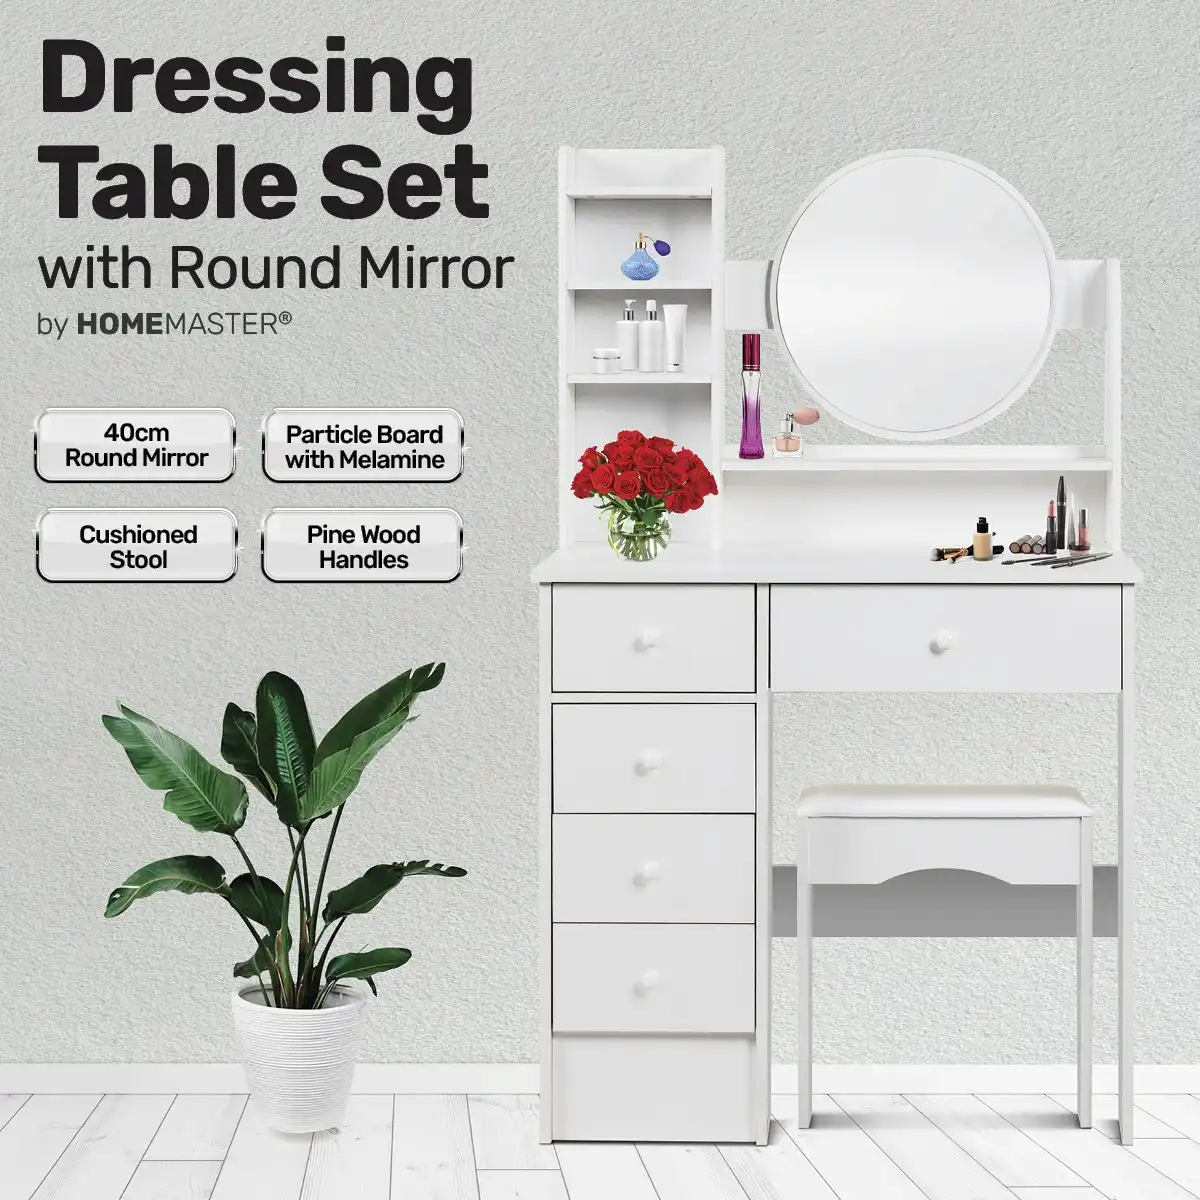 Home Master Dressing Table Set With Stool Round Vanity Mirror Stylish Design